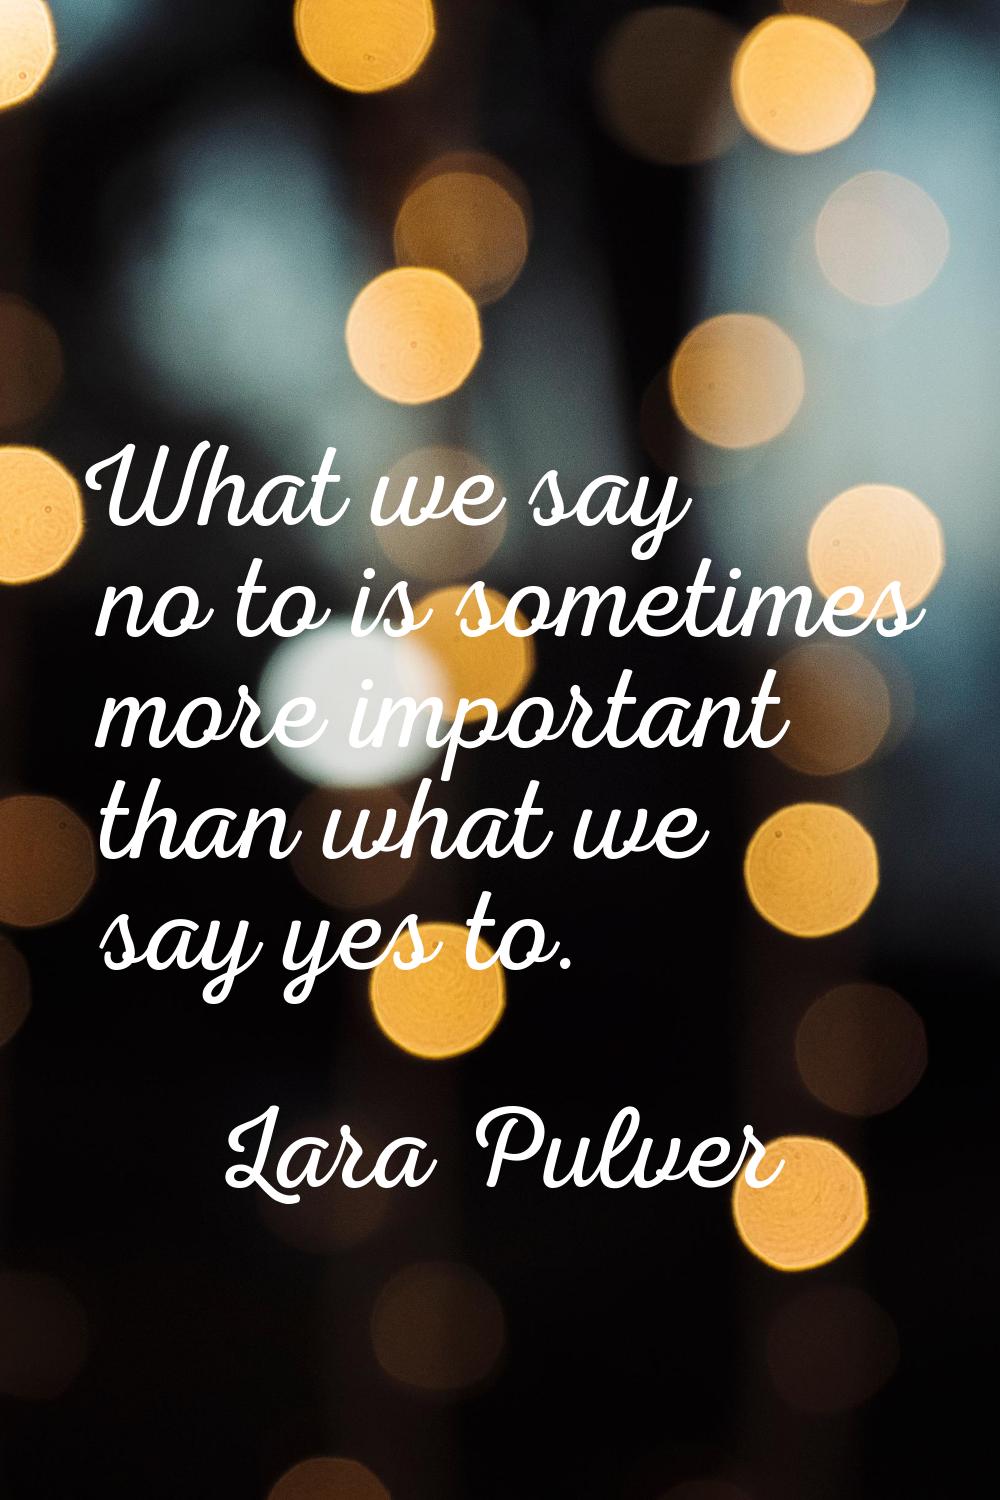 What we say no to is sometimes more important than what we say yes to.